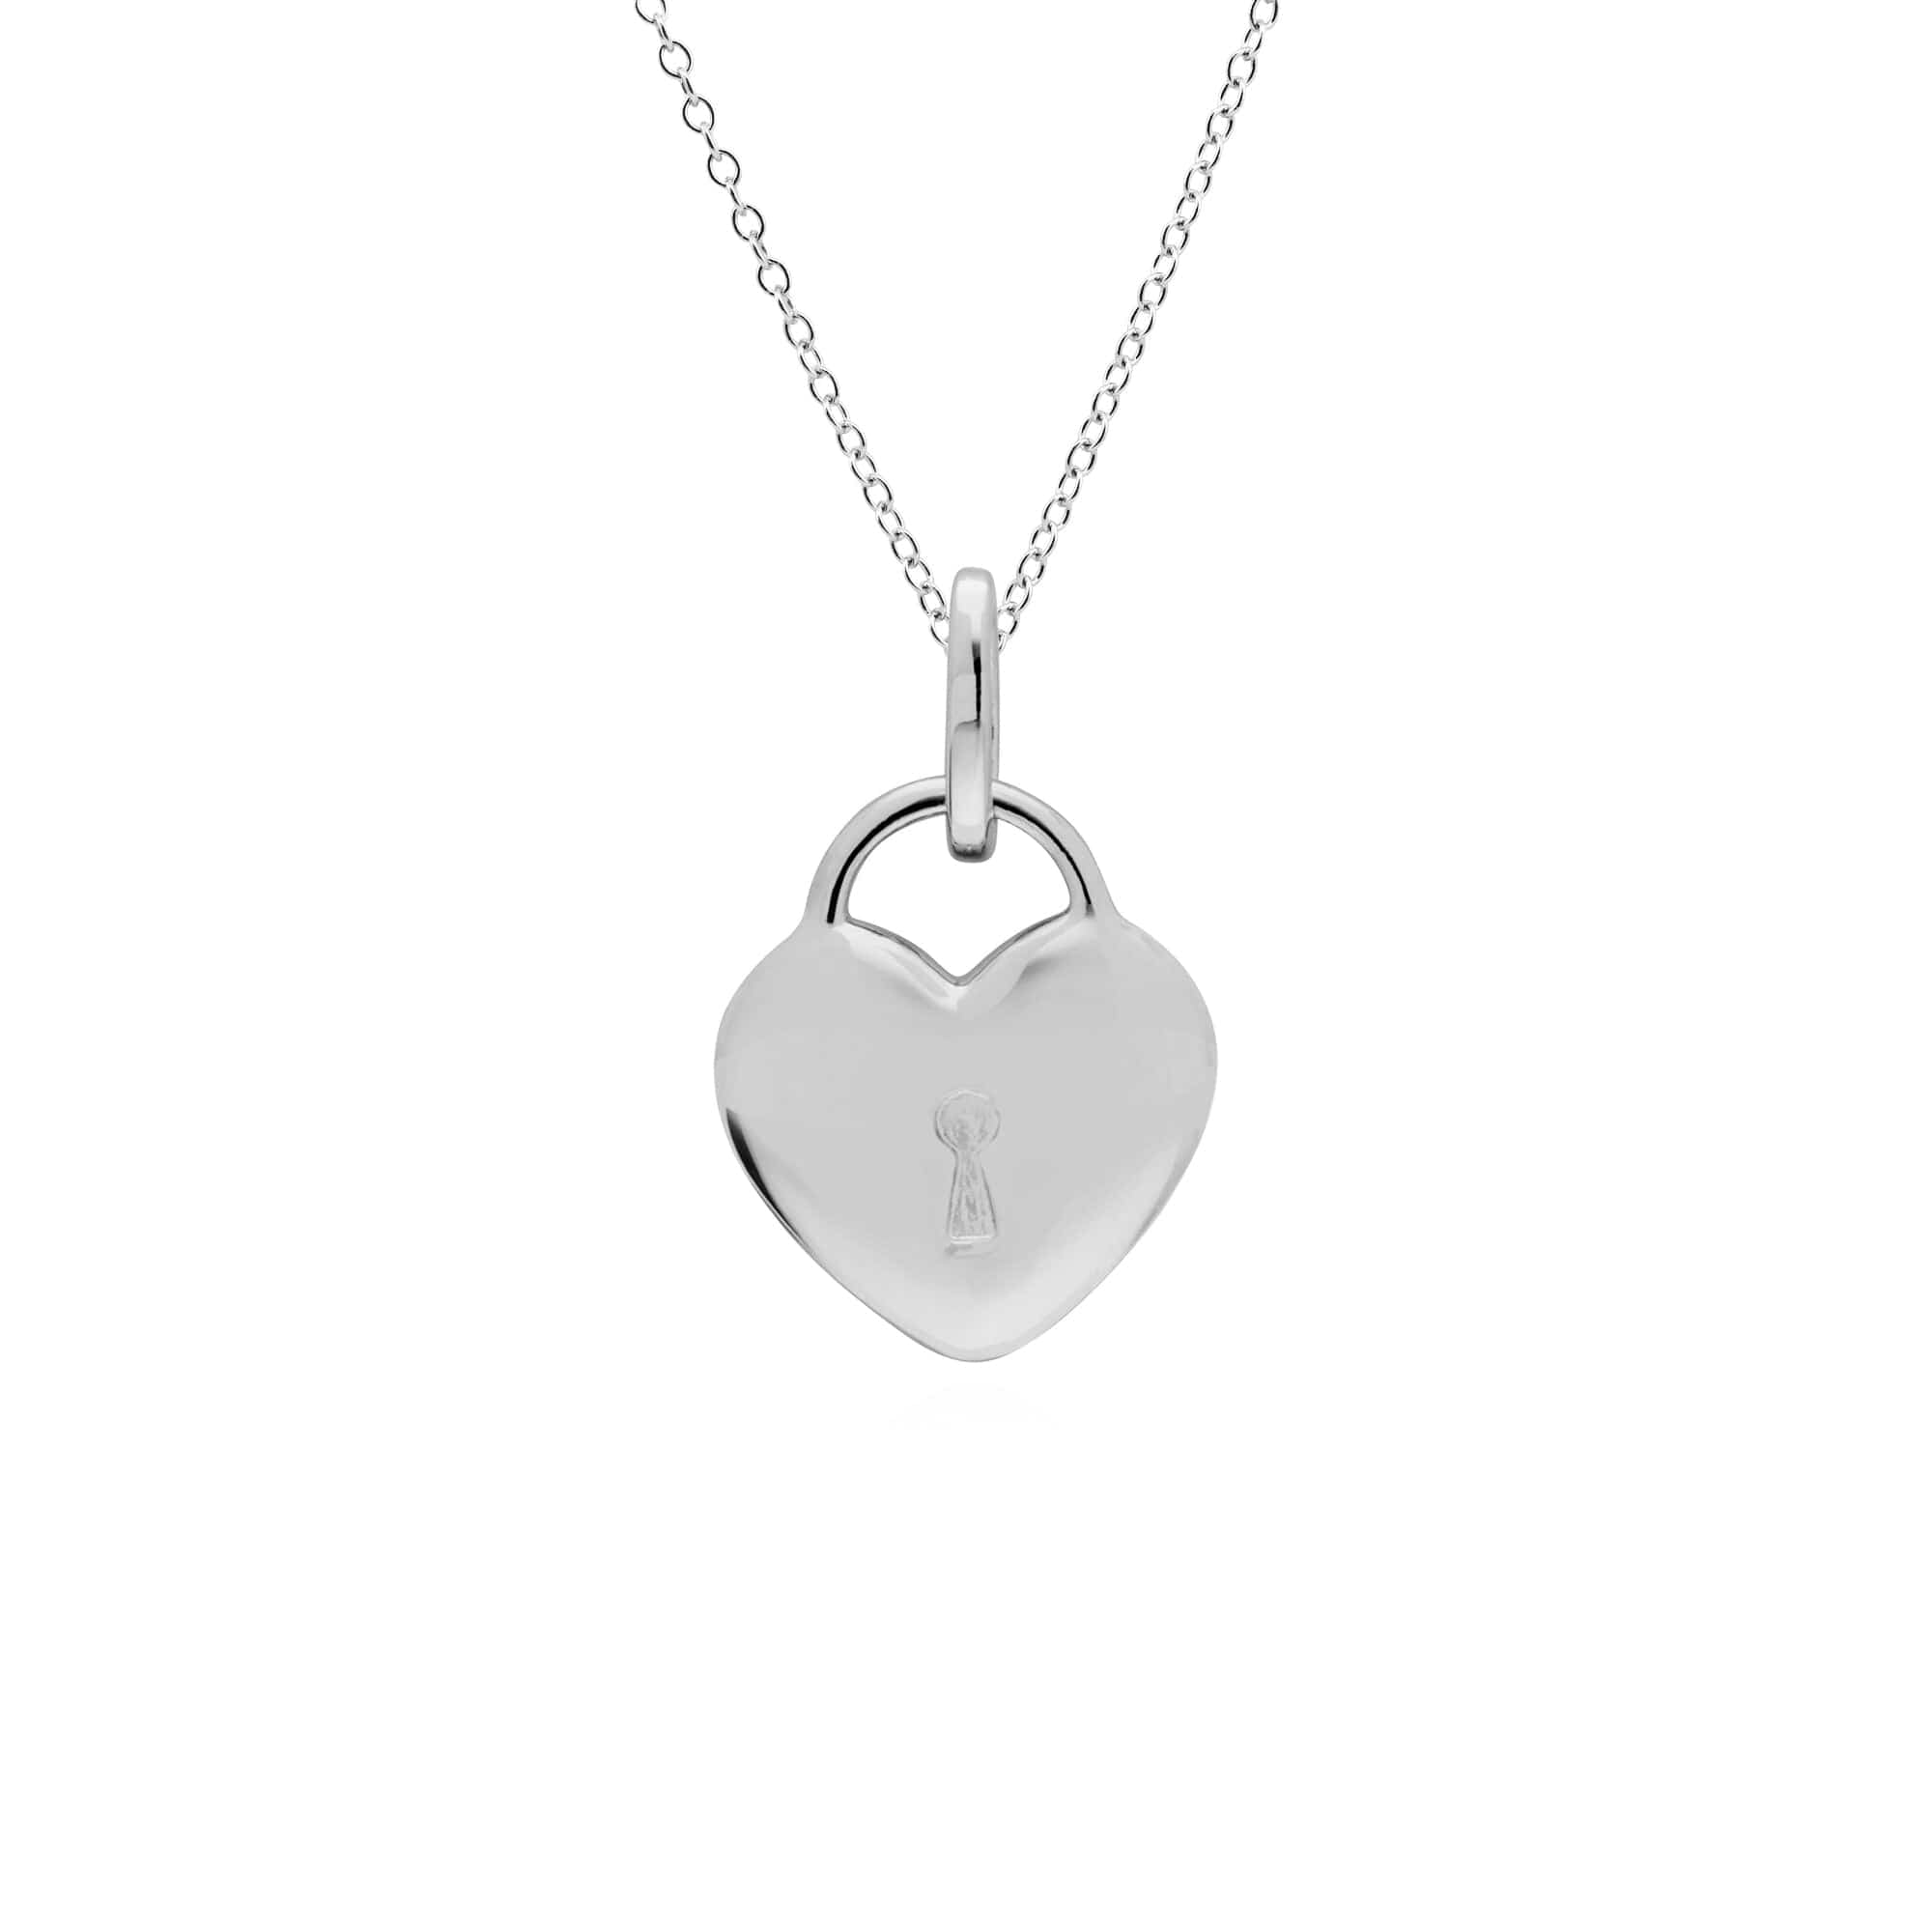 270P026409925-270P027001925 Classic Heart Lock Pendant & Clear Topaz Key Charm in 925 Sterling Silver 3